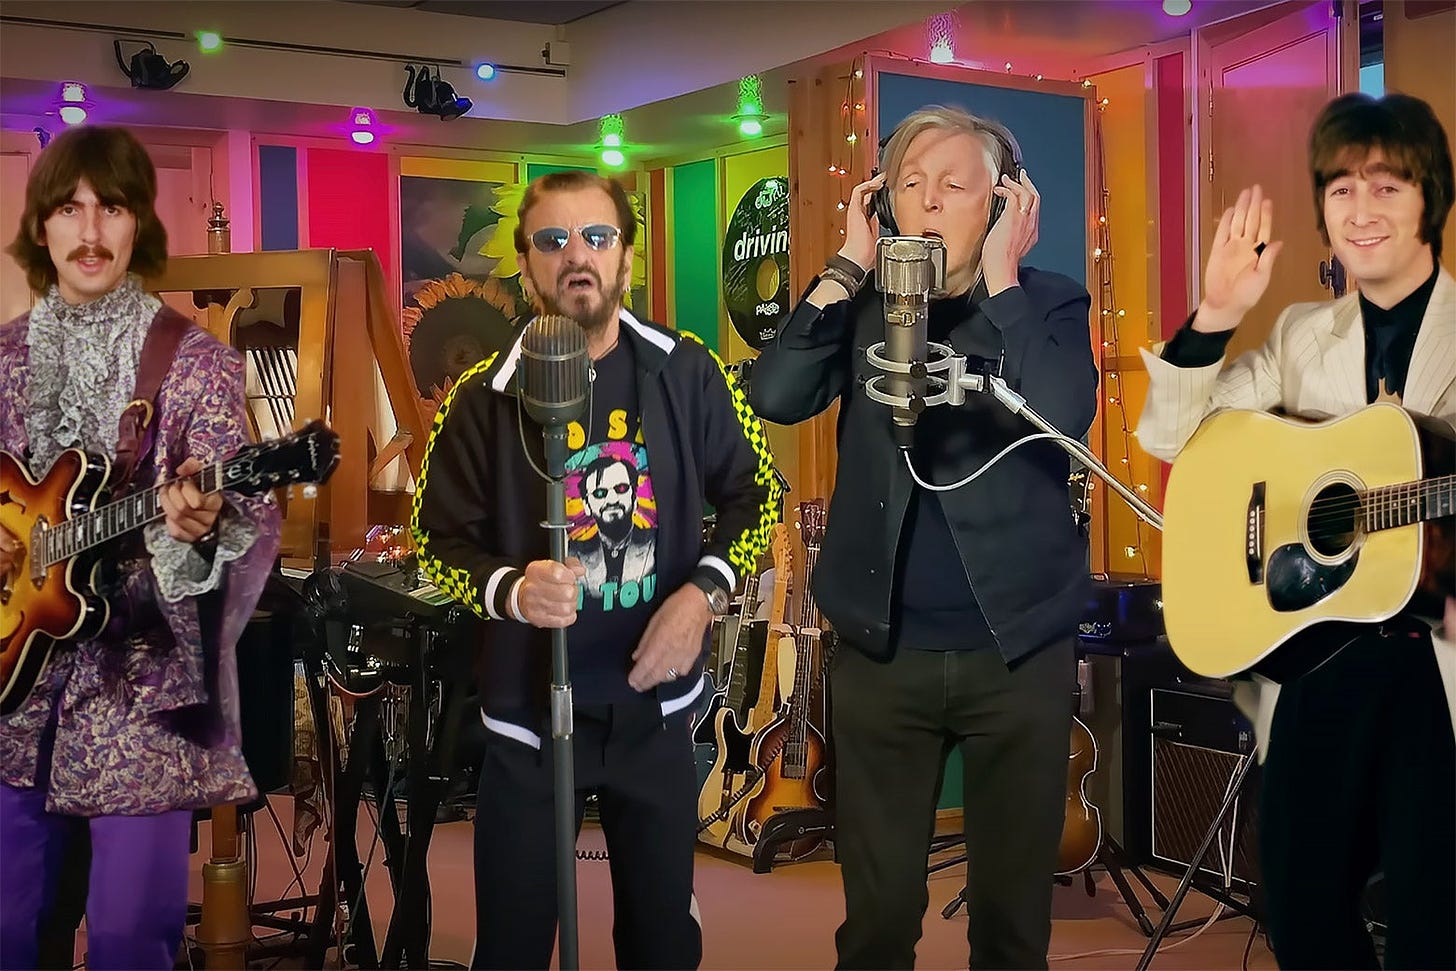 George, Ringo, Paul, and John of the Beatles stand in a performance space, Ringo and Paul as their present-day selves, George and John from archival footage.